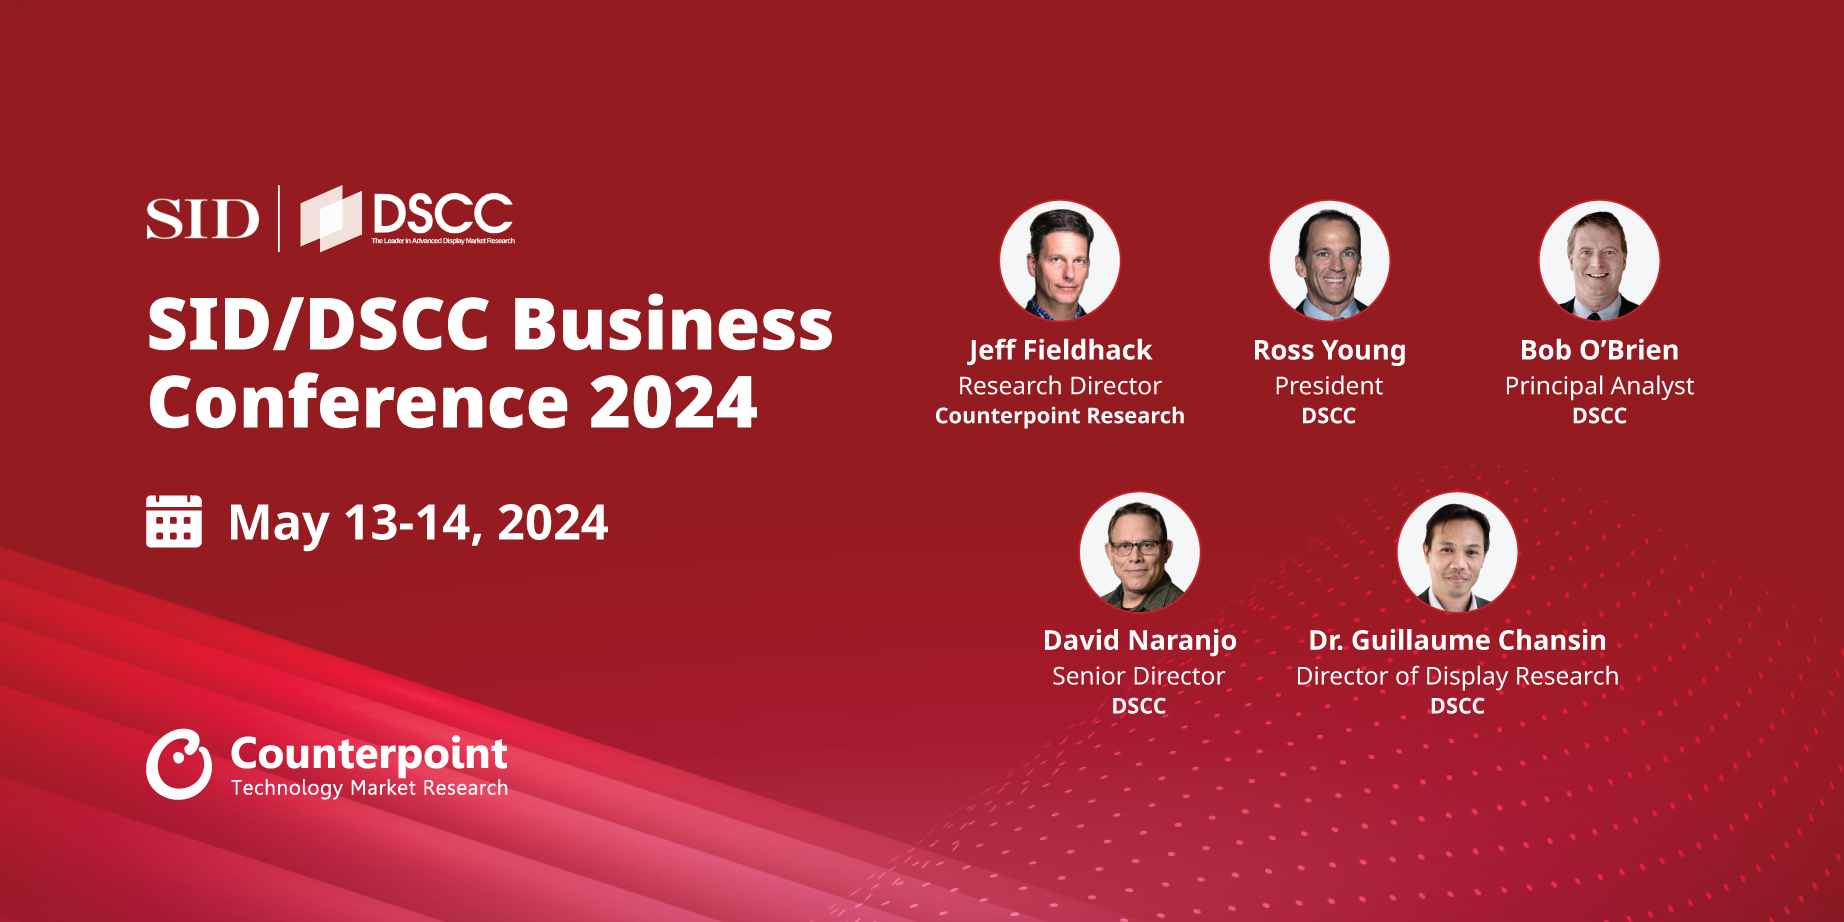 Join us in meeting Counterpoint Research at the SID/DSCC Business Conference 2024!